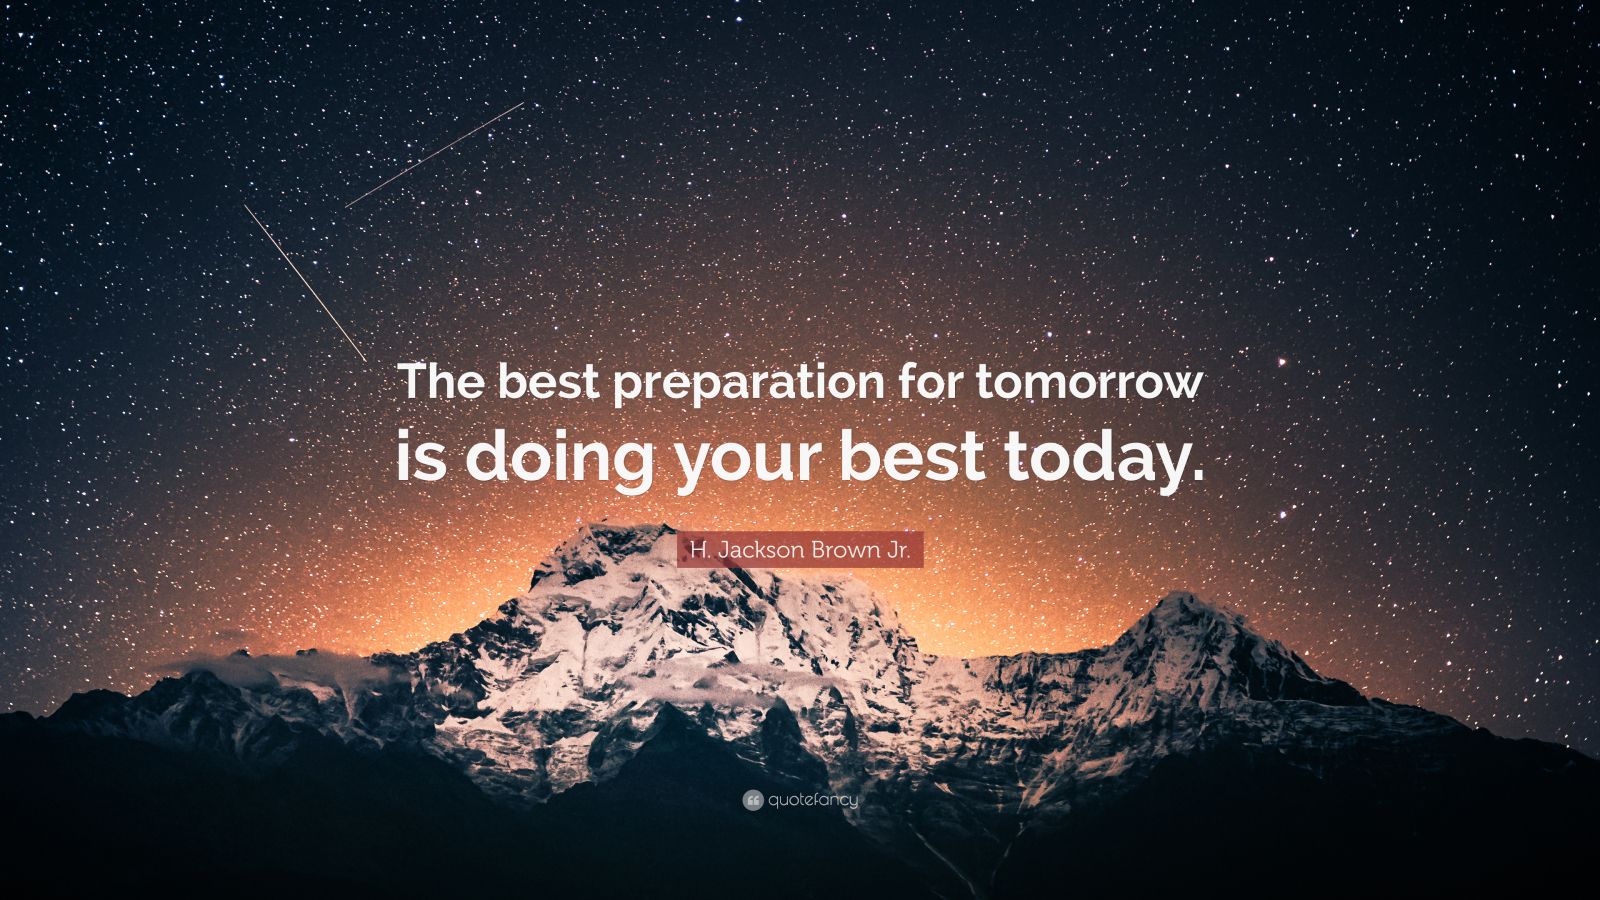 H. Jackson Brown Jr. Quote: “The best preparation for tomorrow is doing